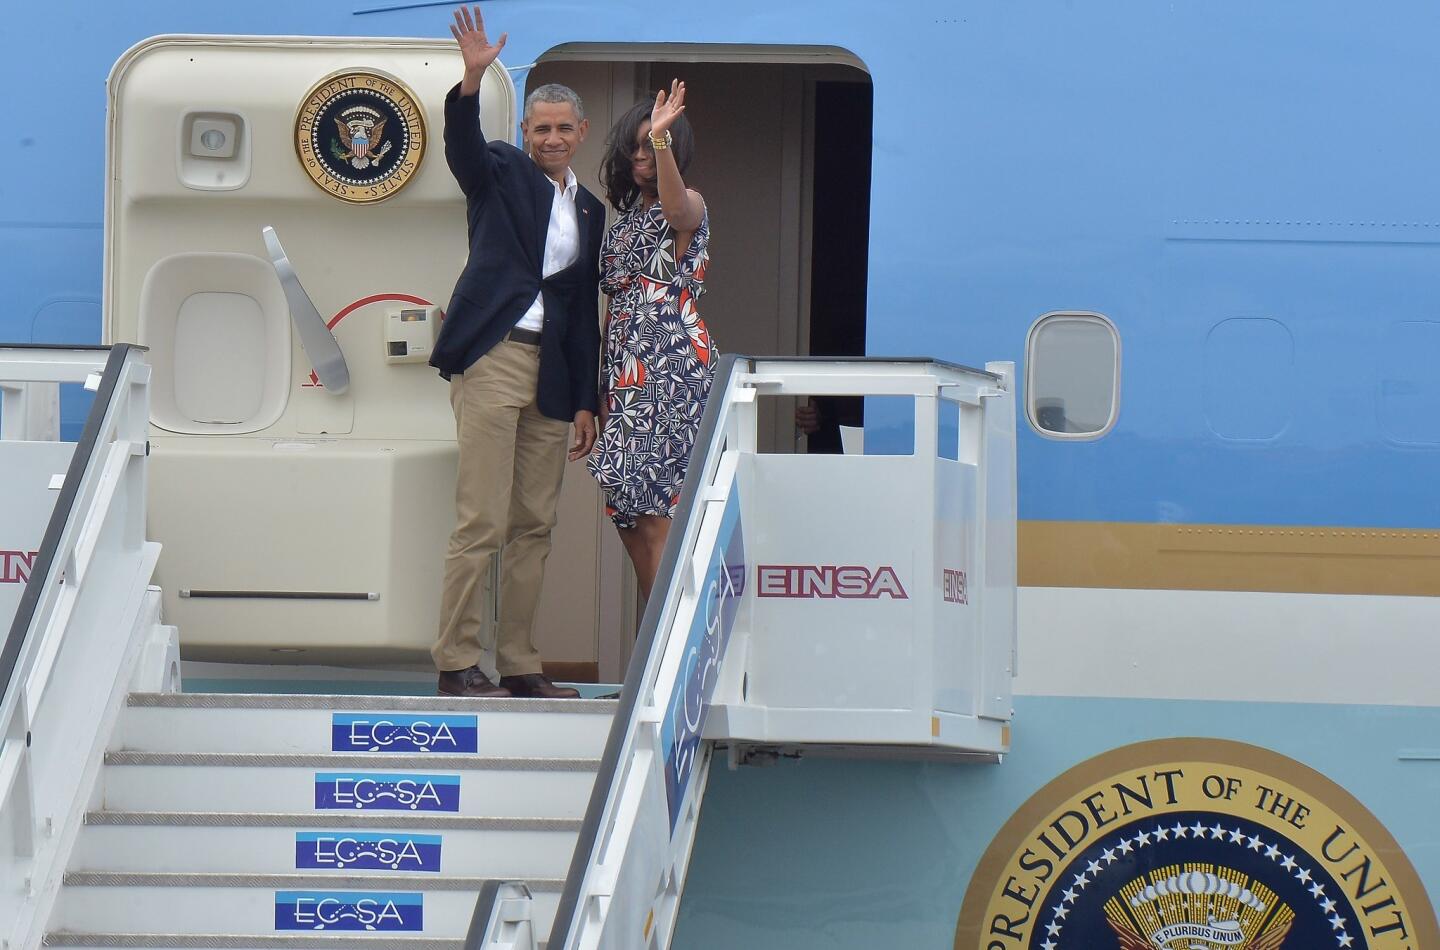 President Barack Obama and Michelle Obama wave as they board Air Force One at Jose Marti International Airport in Havana, Cuba, on March 22, 2016, ending the president's historic three-day visit.